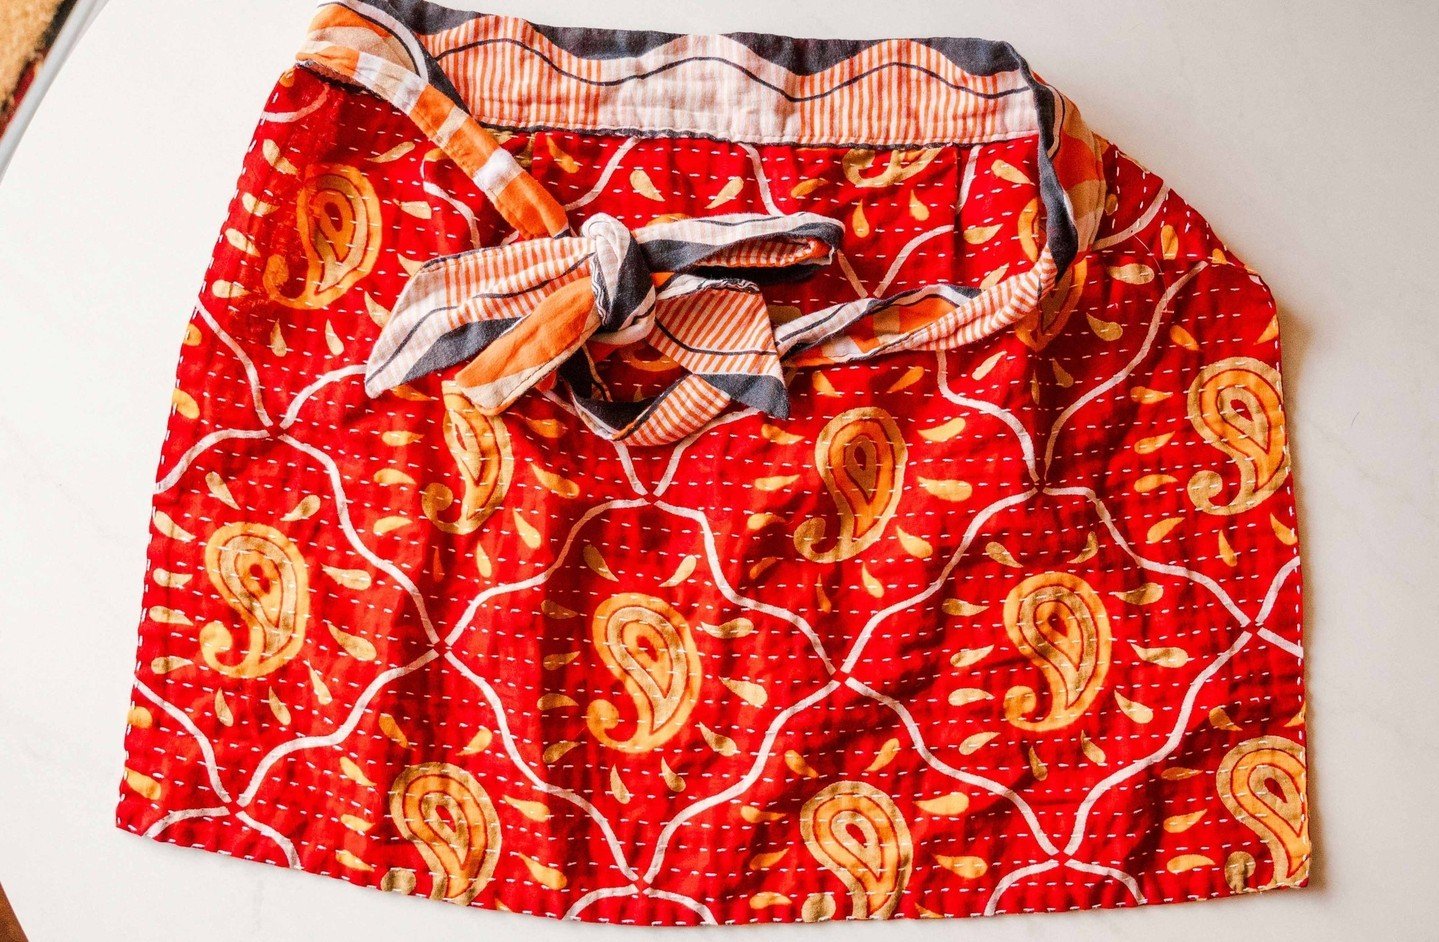 Keep clean while cooking with a clean purchase. We love our fair trade Kantha Aprons!⁠
⁠
⁠
✨Click linkin.bio to shop✨⁠
.⁠
.⁠
.⁠
.⁠
.⁠
.⁠
.⁠
⁠
#fairtrade⁠
#fairtradeproducts⁠
#handmade⁠
#India⁠
#dogood⁠
#EthicallySourcedGoods